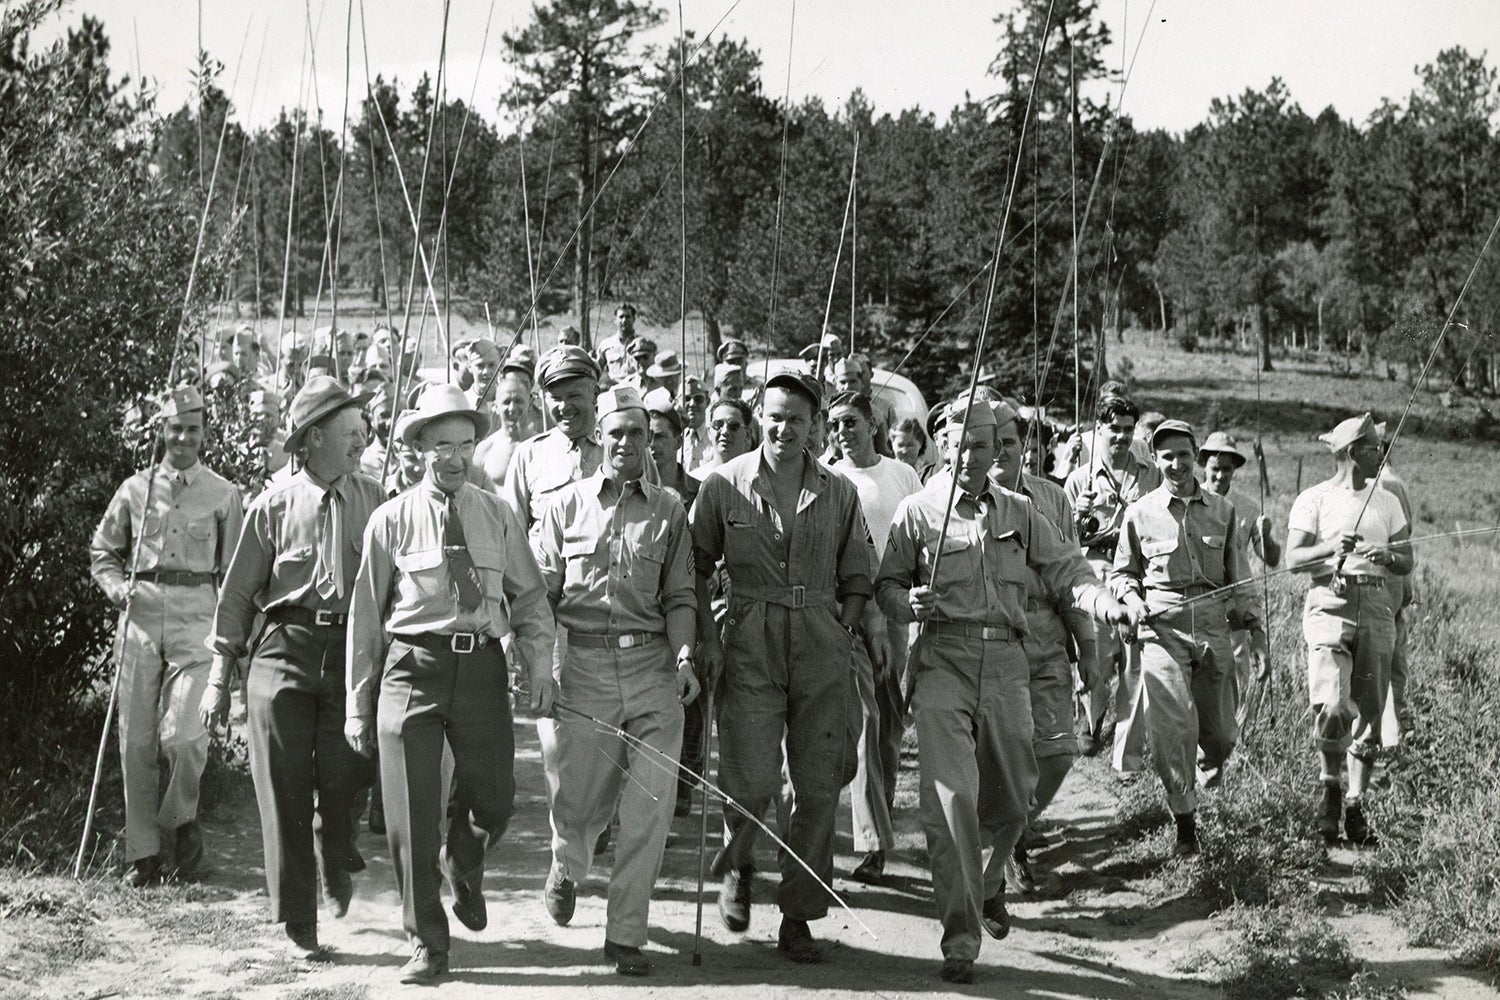 group of US airmen holding fishing rods walk down small road